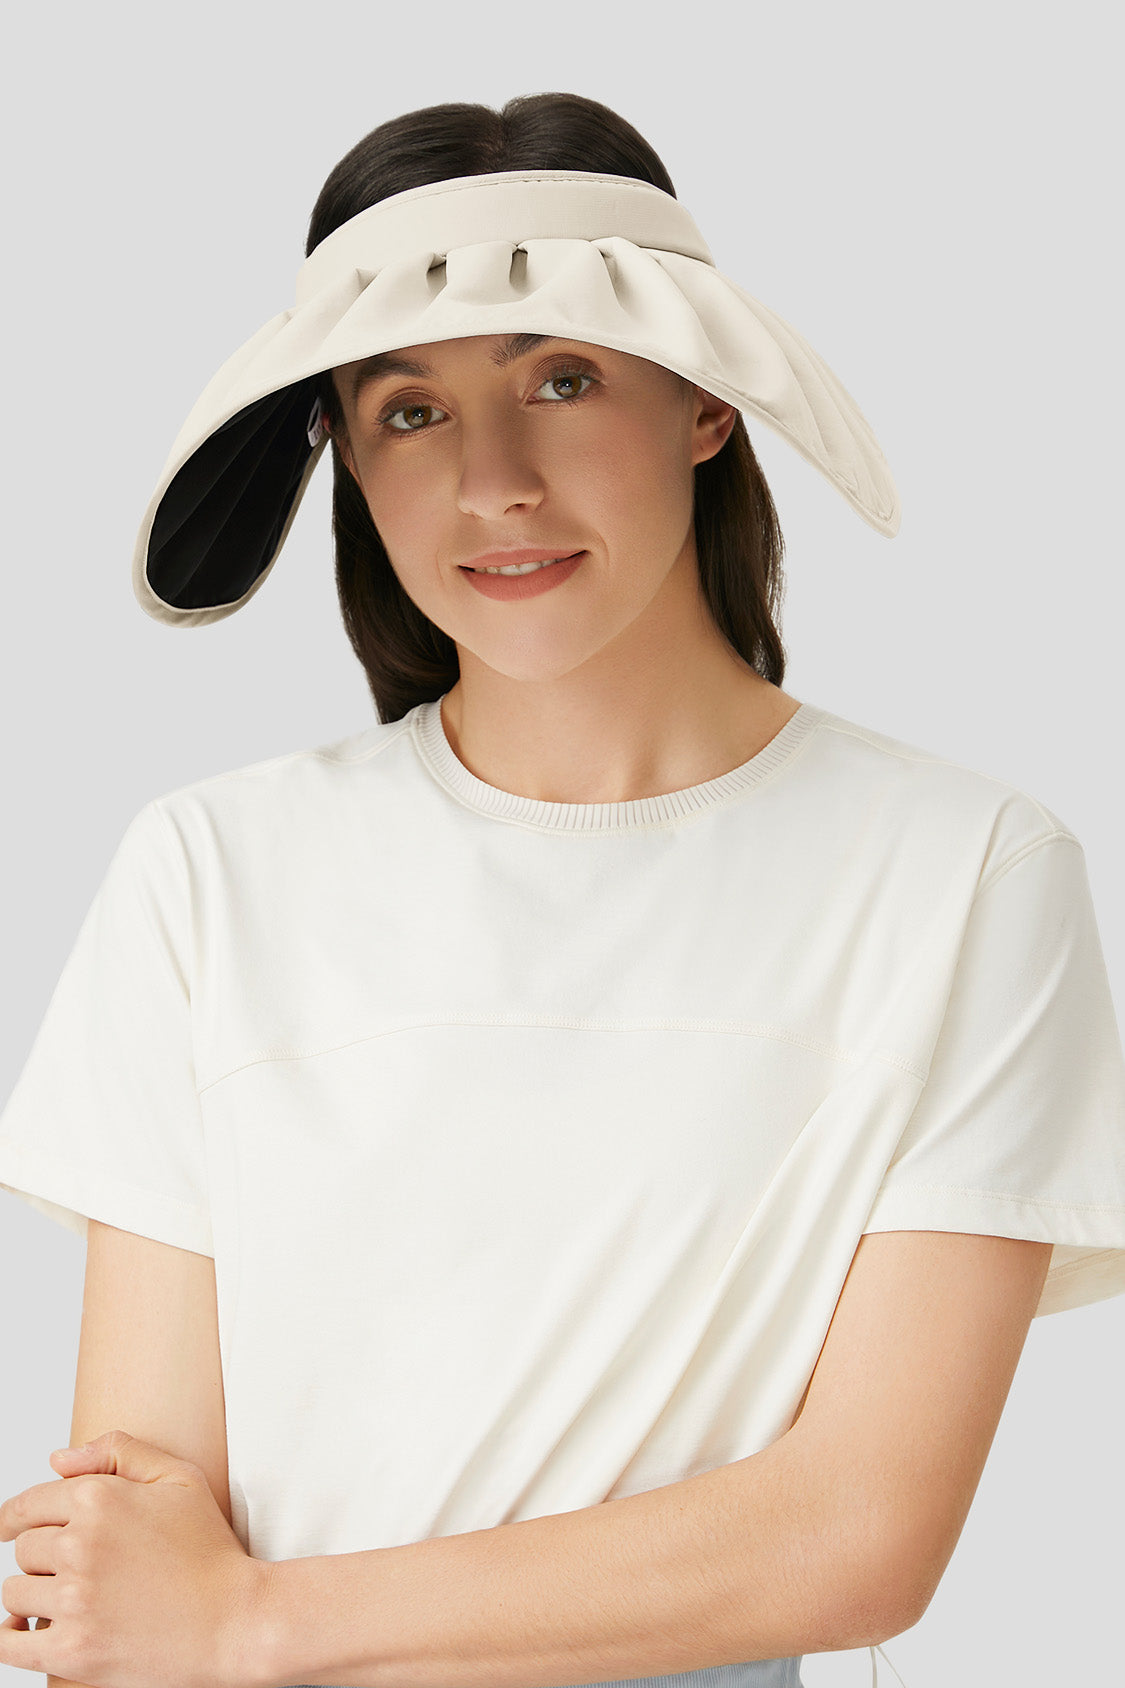 Visor Beret: Simple Fashion Casual Sun Hat For Women, UV Protection For  Outdoor Sports, Travel, Driving, And Beach Shade From Lukasamanic, $17.4